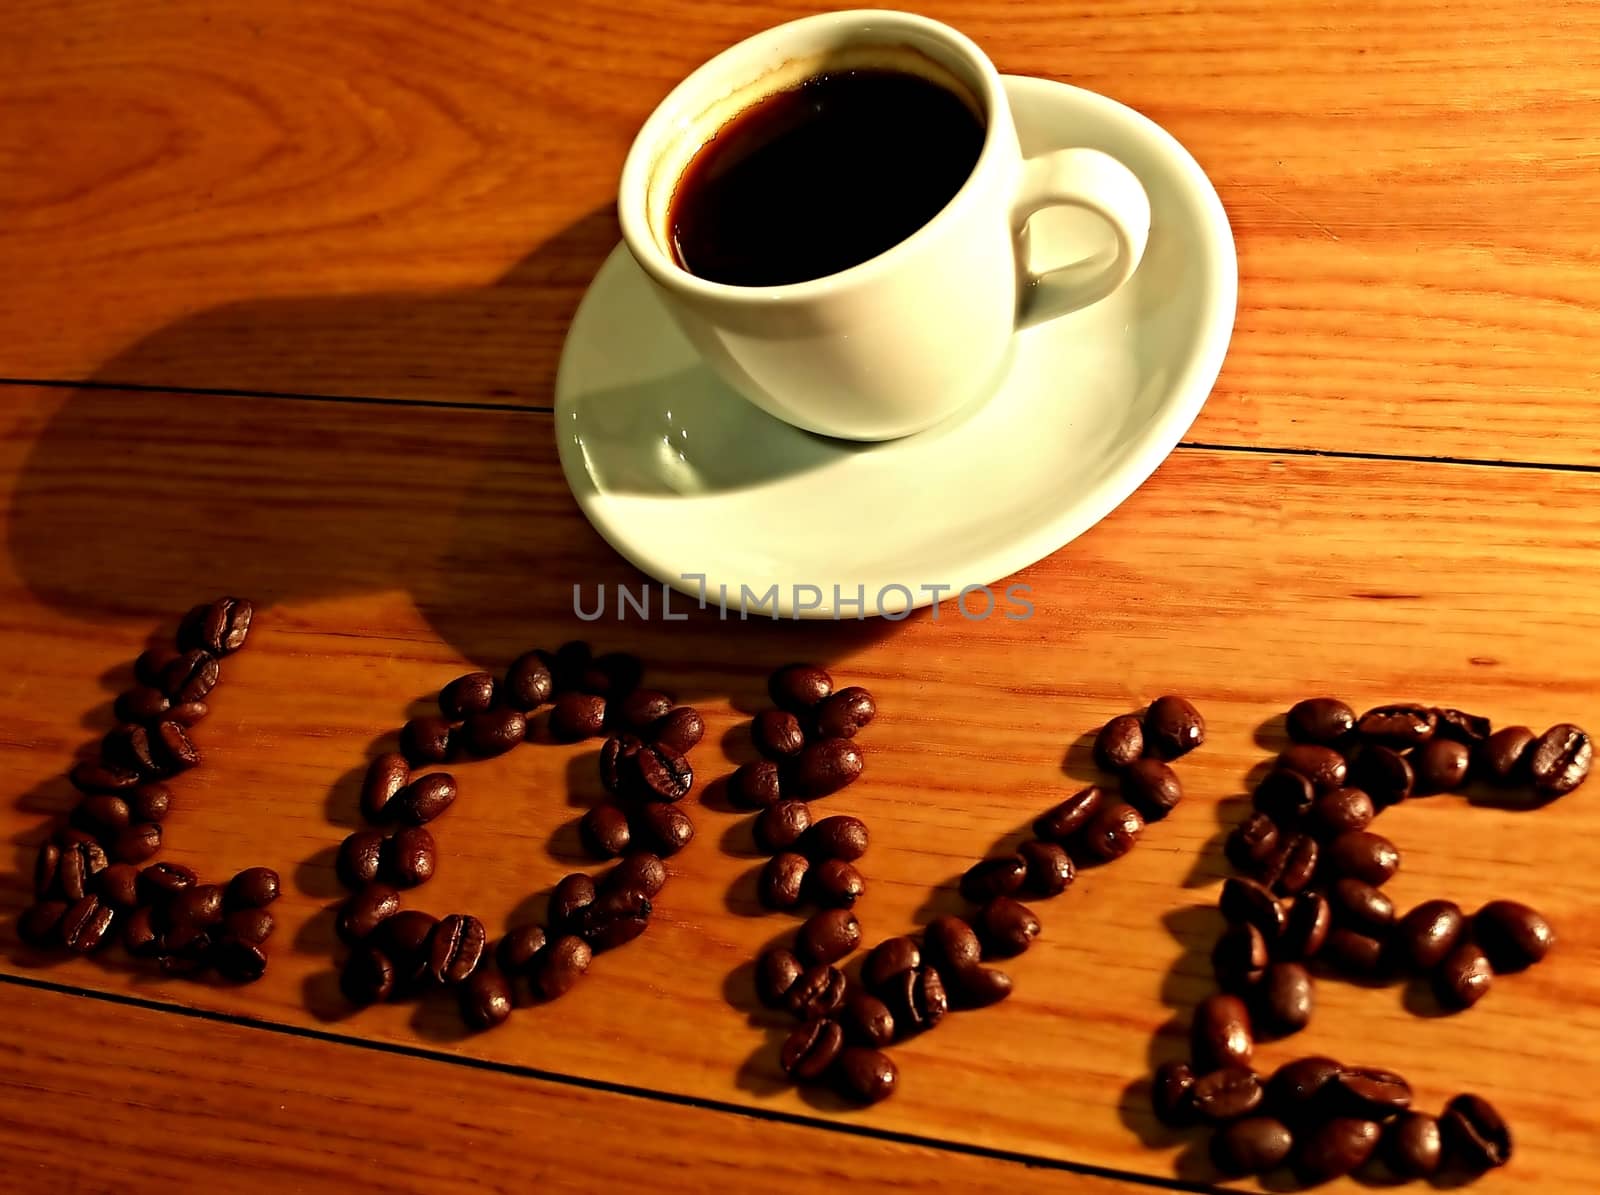 LOVE COFFEE made of coffee beans and espresso cup